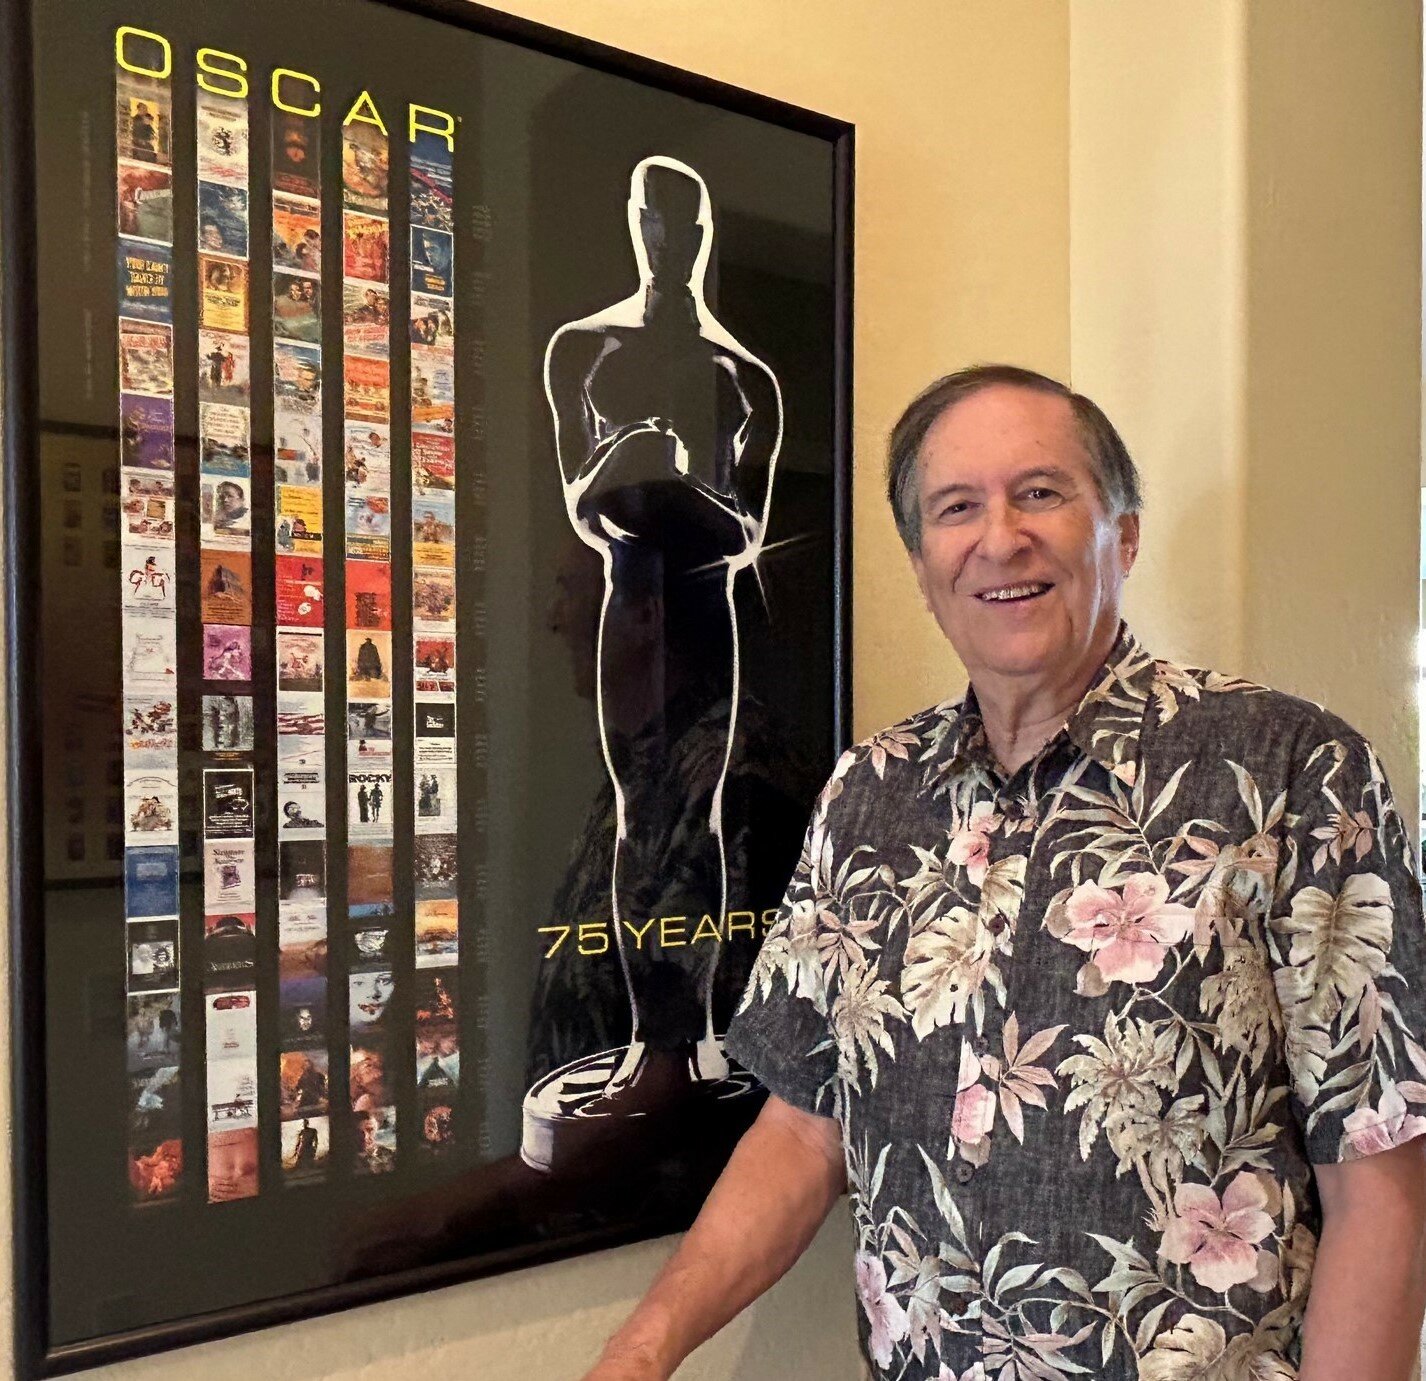 Retired entertainment attorney Steve Katz will present “The Golden Age of Television” at Temple Beth Shalom of the West Valley.